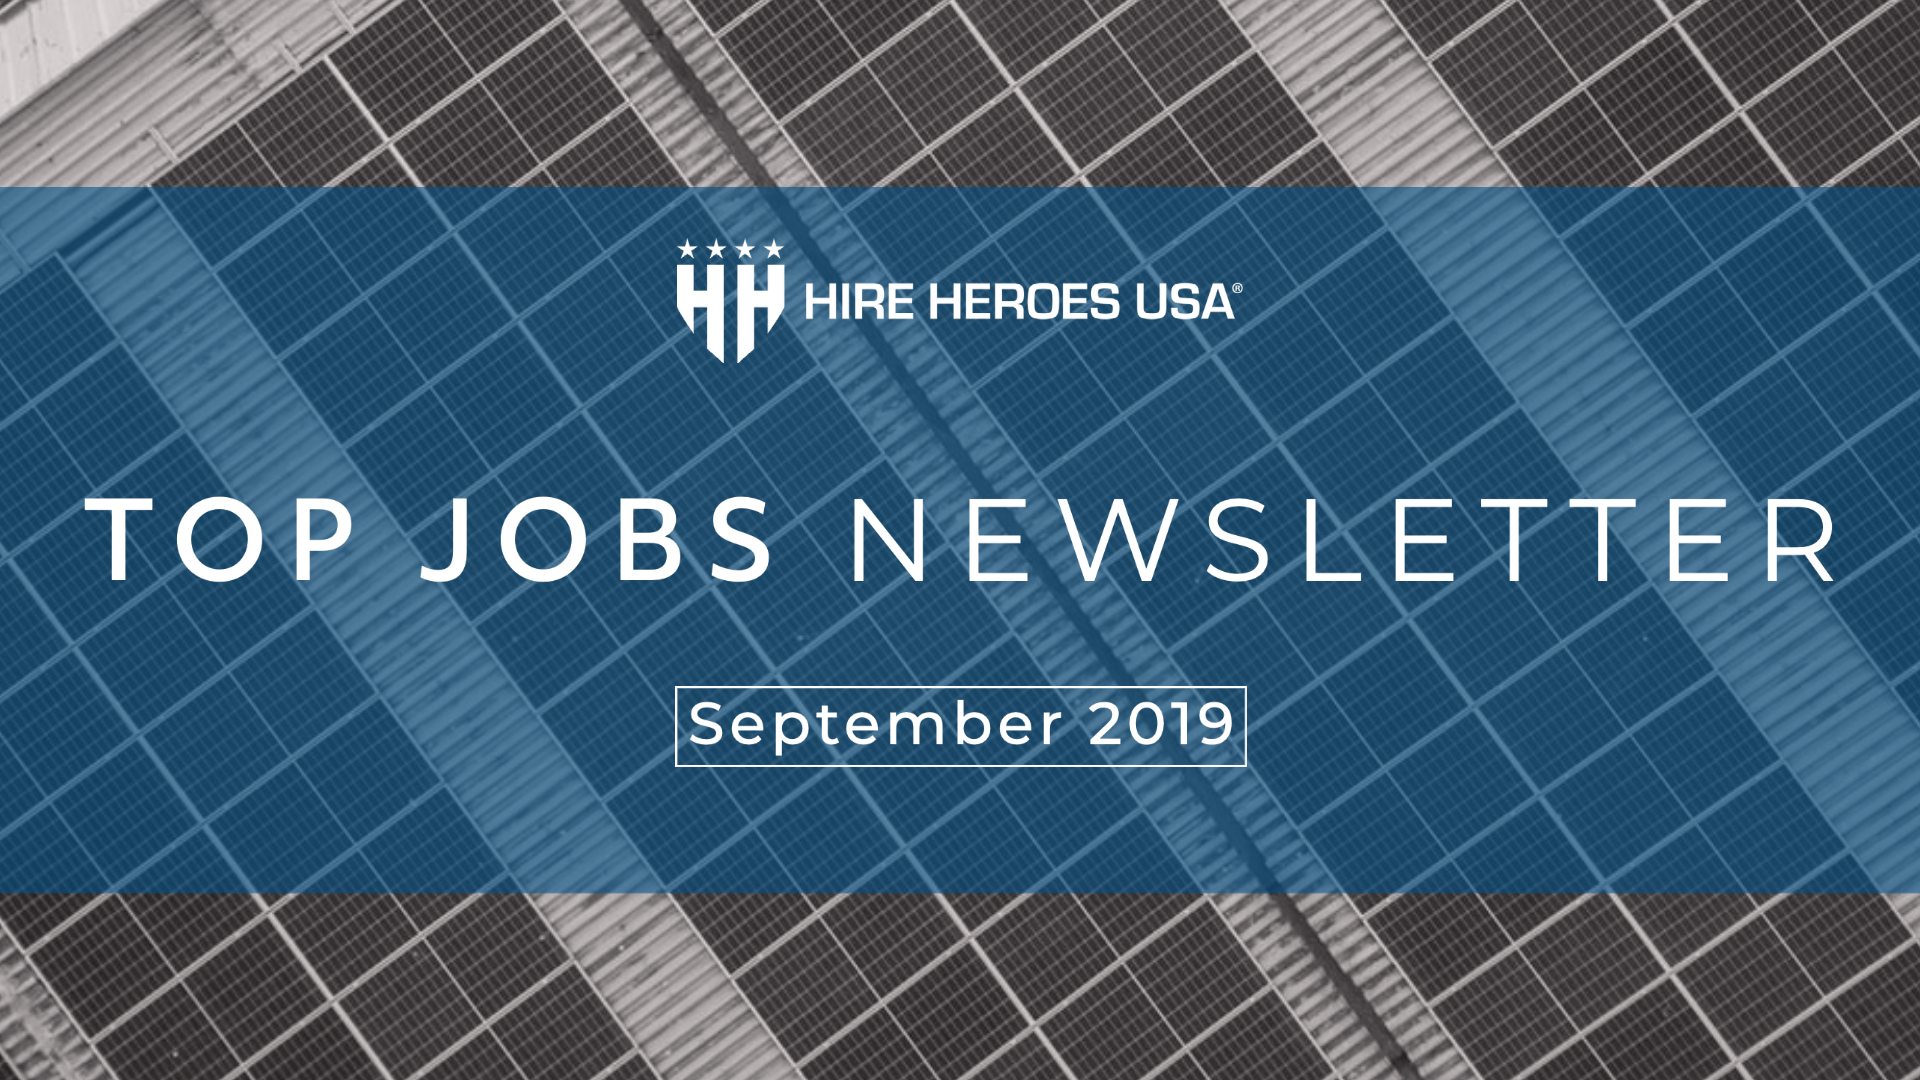 Top Jobs for the Month of September 2019